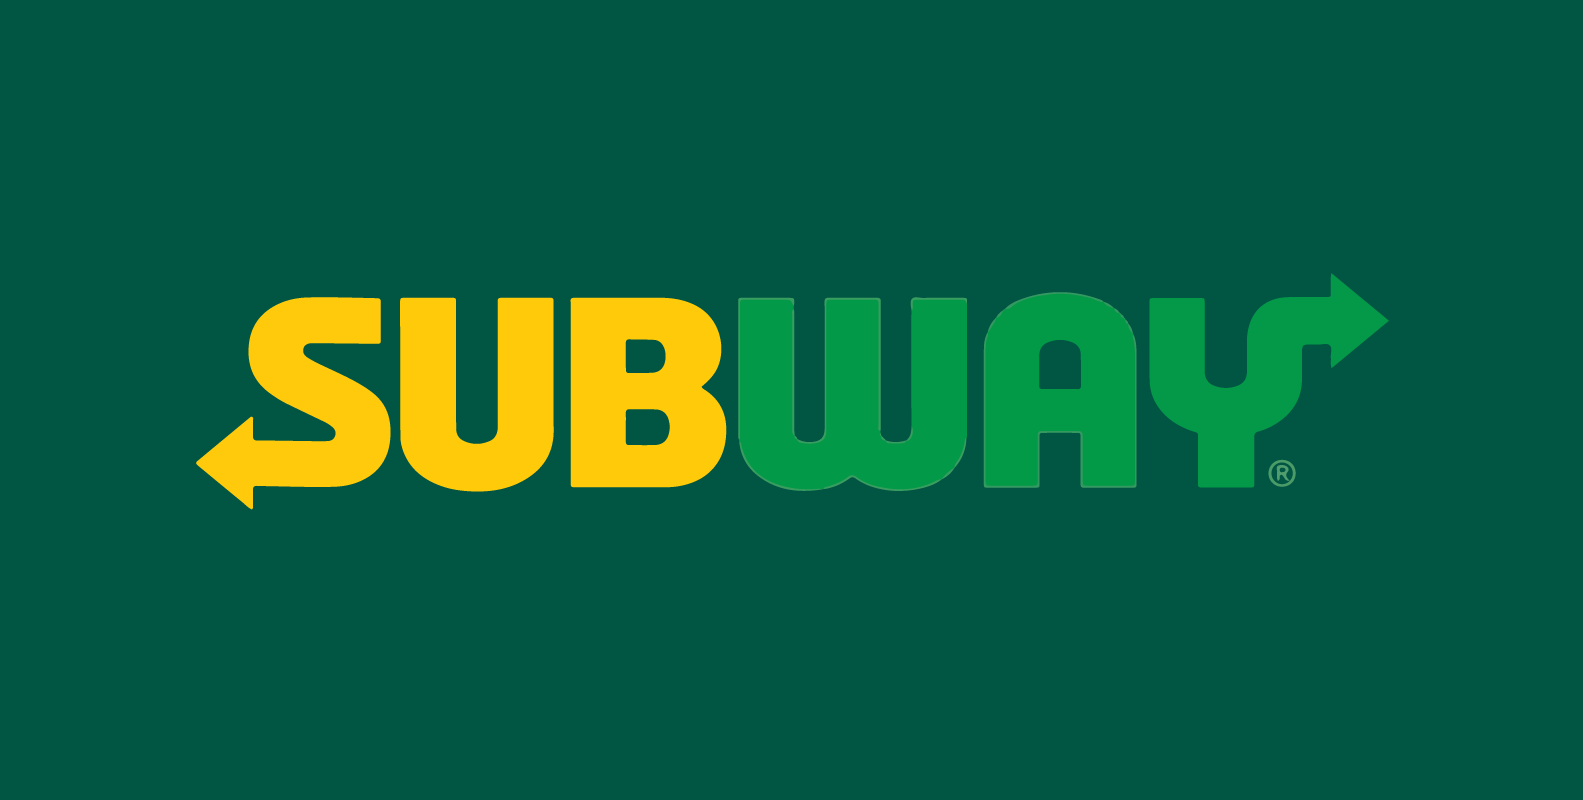 Subway Branding: How to Create a Memorable and Impactful Brand Identity